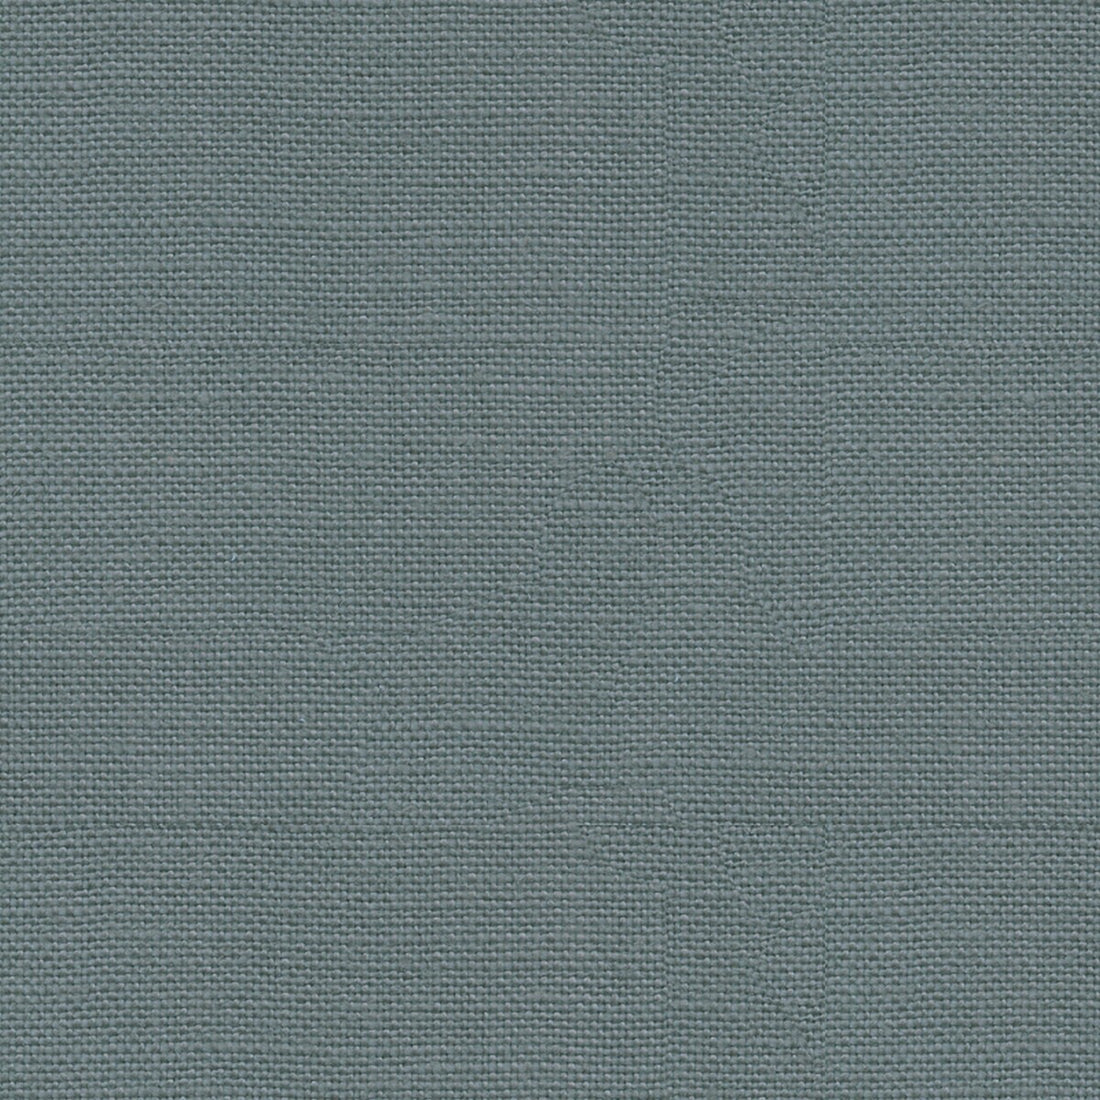 Lea fabric in slate color - pattern J0337.940.0 - by G P &amp; J Baker in the Crayford collection